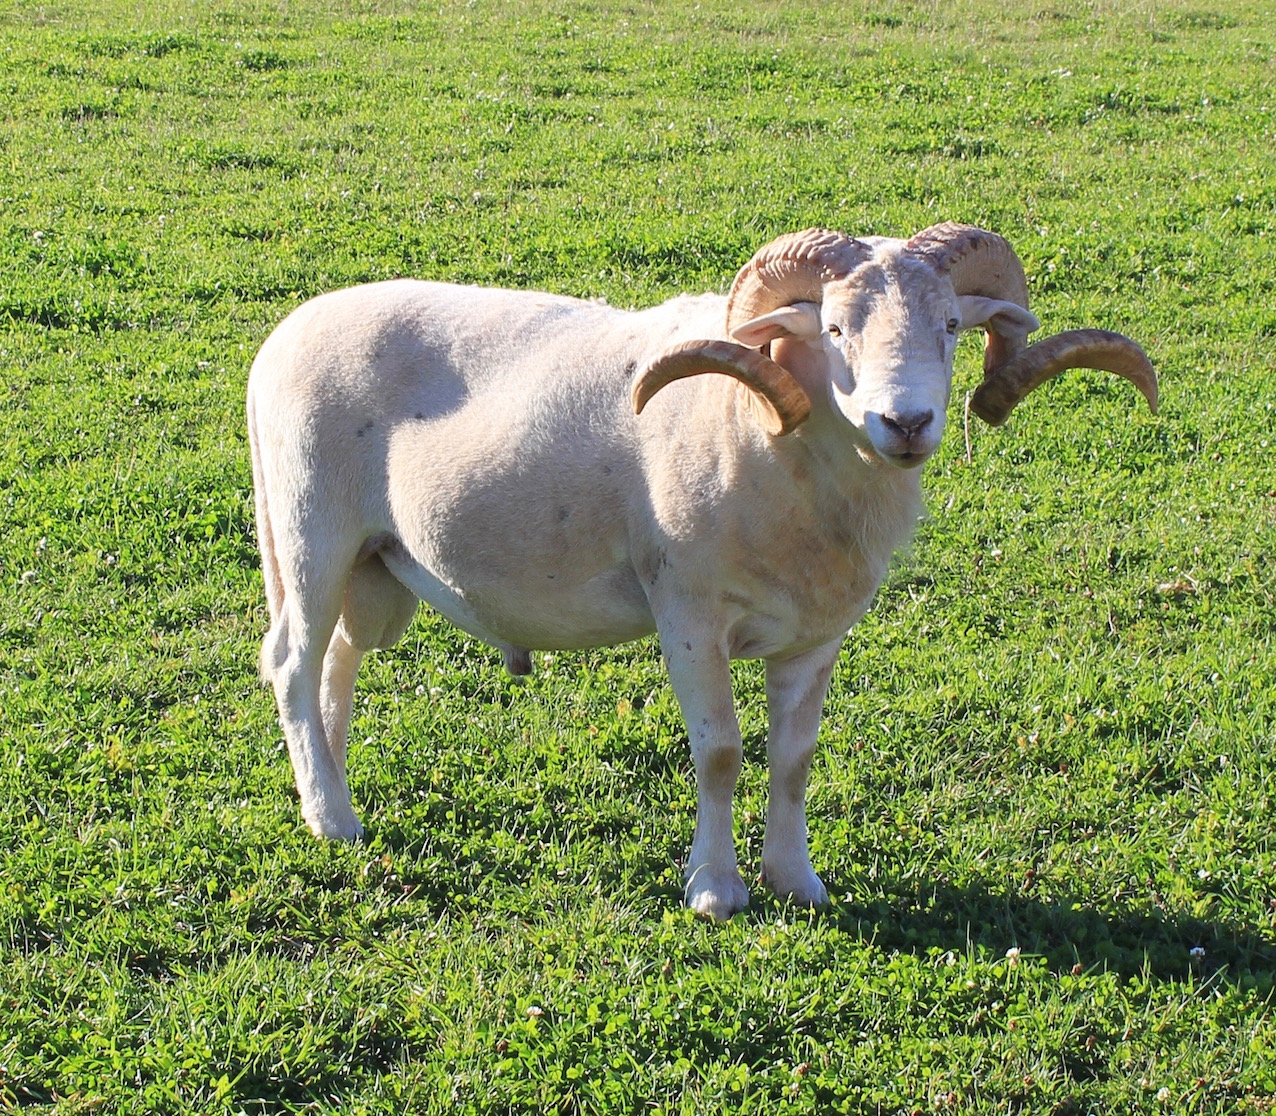 Wiltshire Horn Sheep